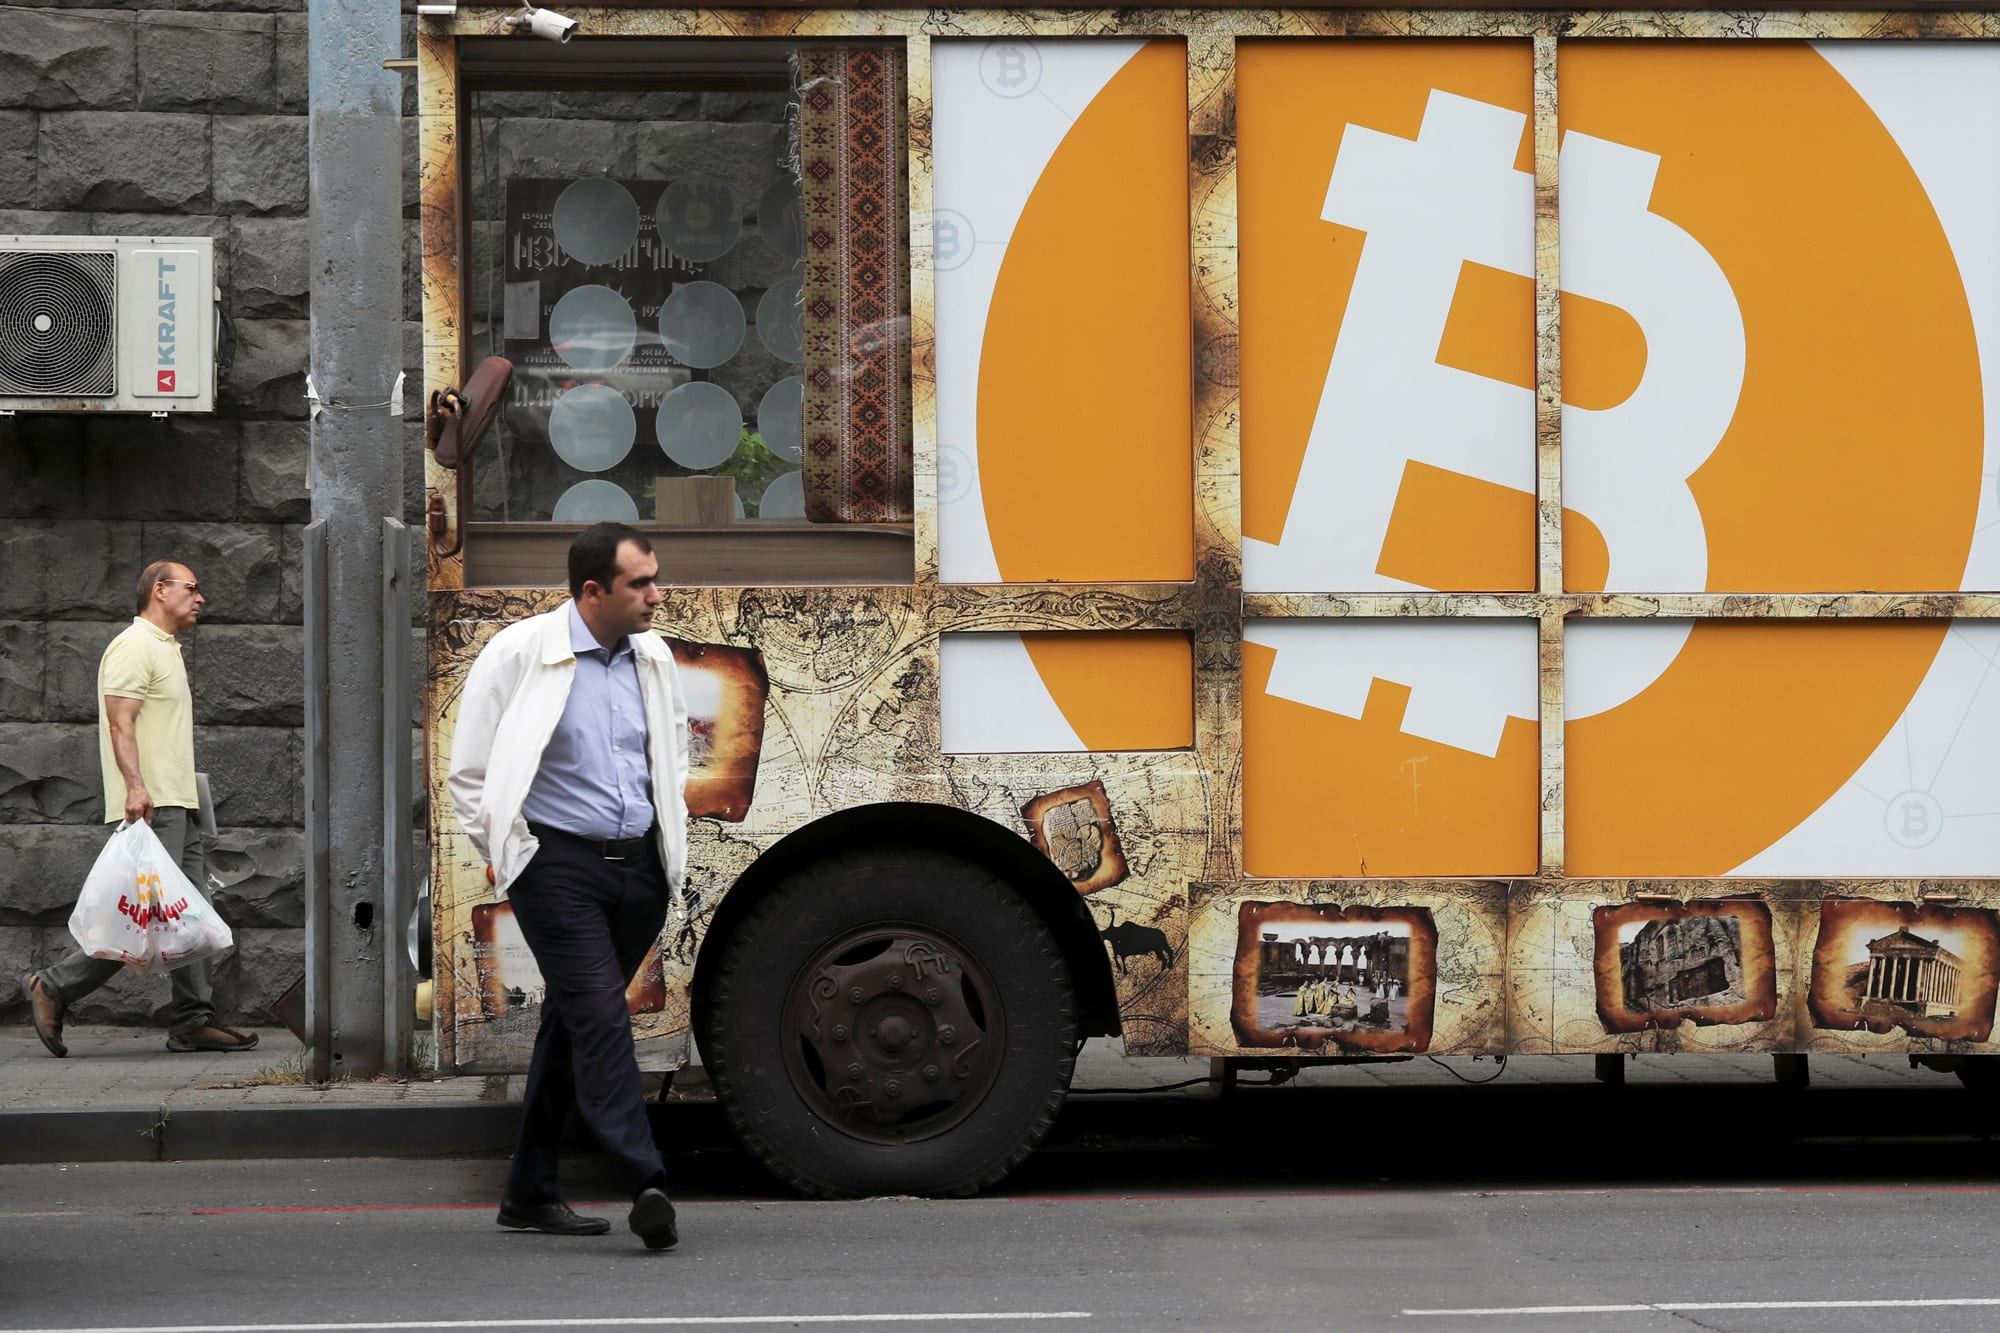 Bitcoin sinks to lowest level since May, falling $3,000 in a month as China accelerates crackdown